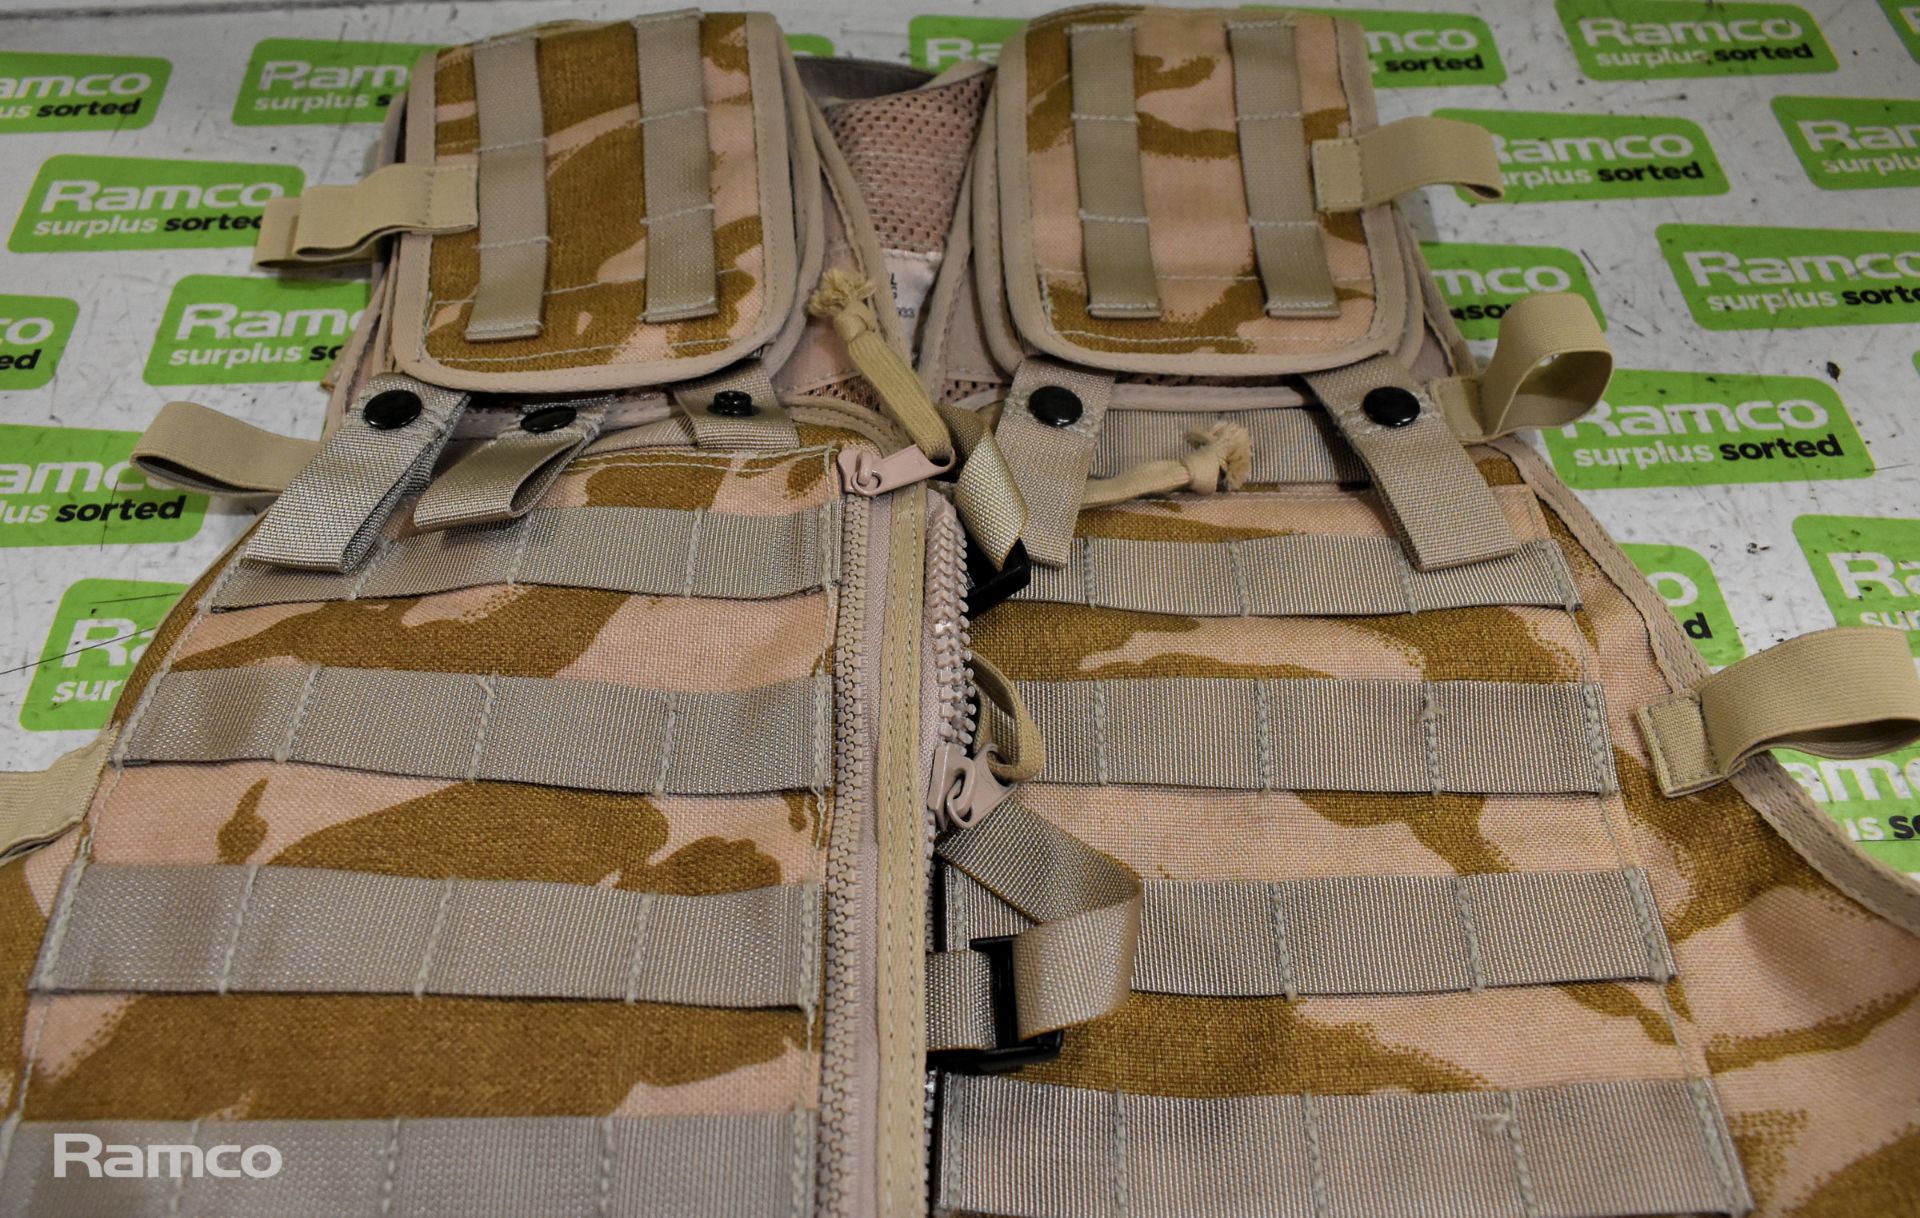 British Army Desert body armour covers,British Army Desert vest with pouches - see description - Image 3 of 6